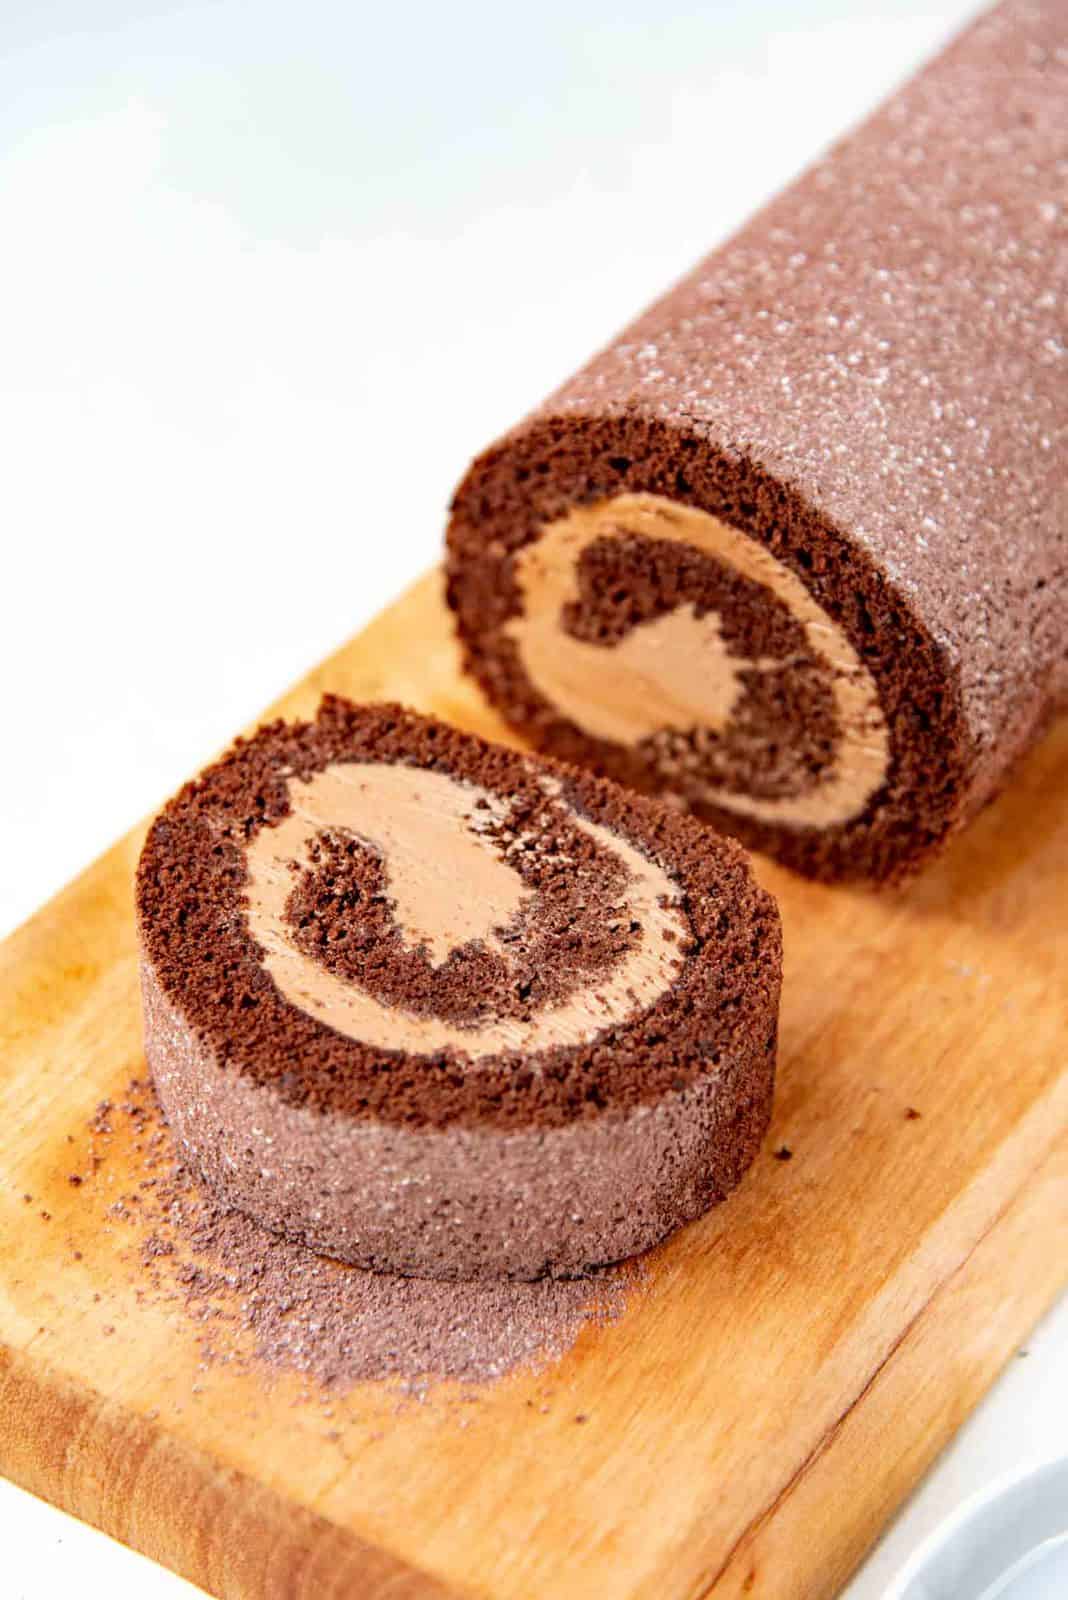 Chocolate swiss roll on a brown serving platter, with a slice cut